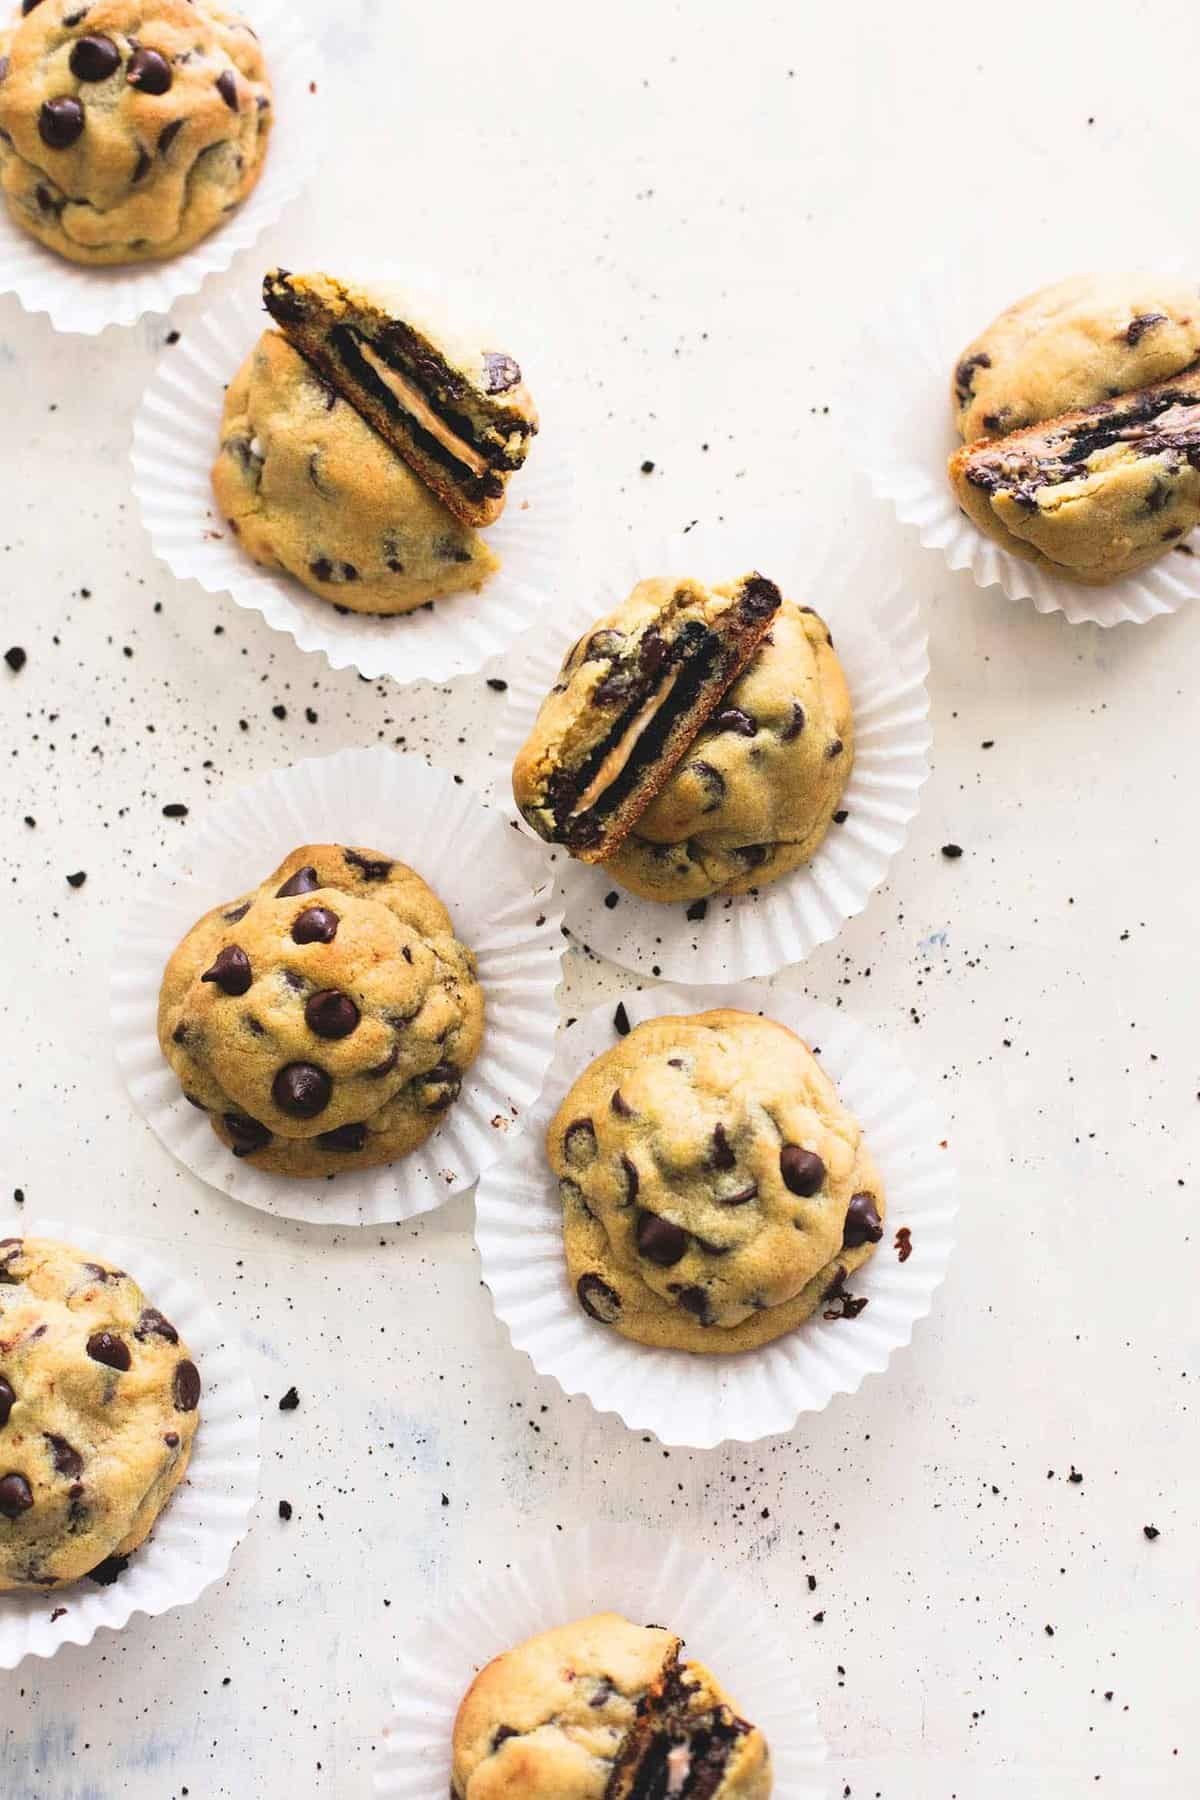 top view of peanut butter Oreo stuffed chocolate chip cookies with a couple broken in half and laying on top of each other all on cupcake liners.